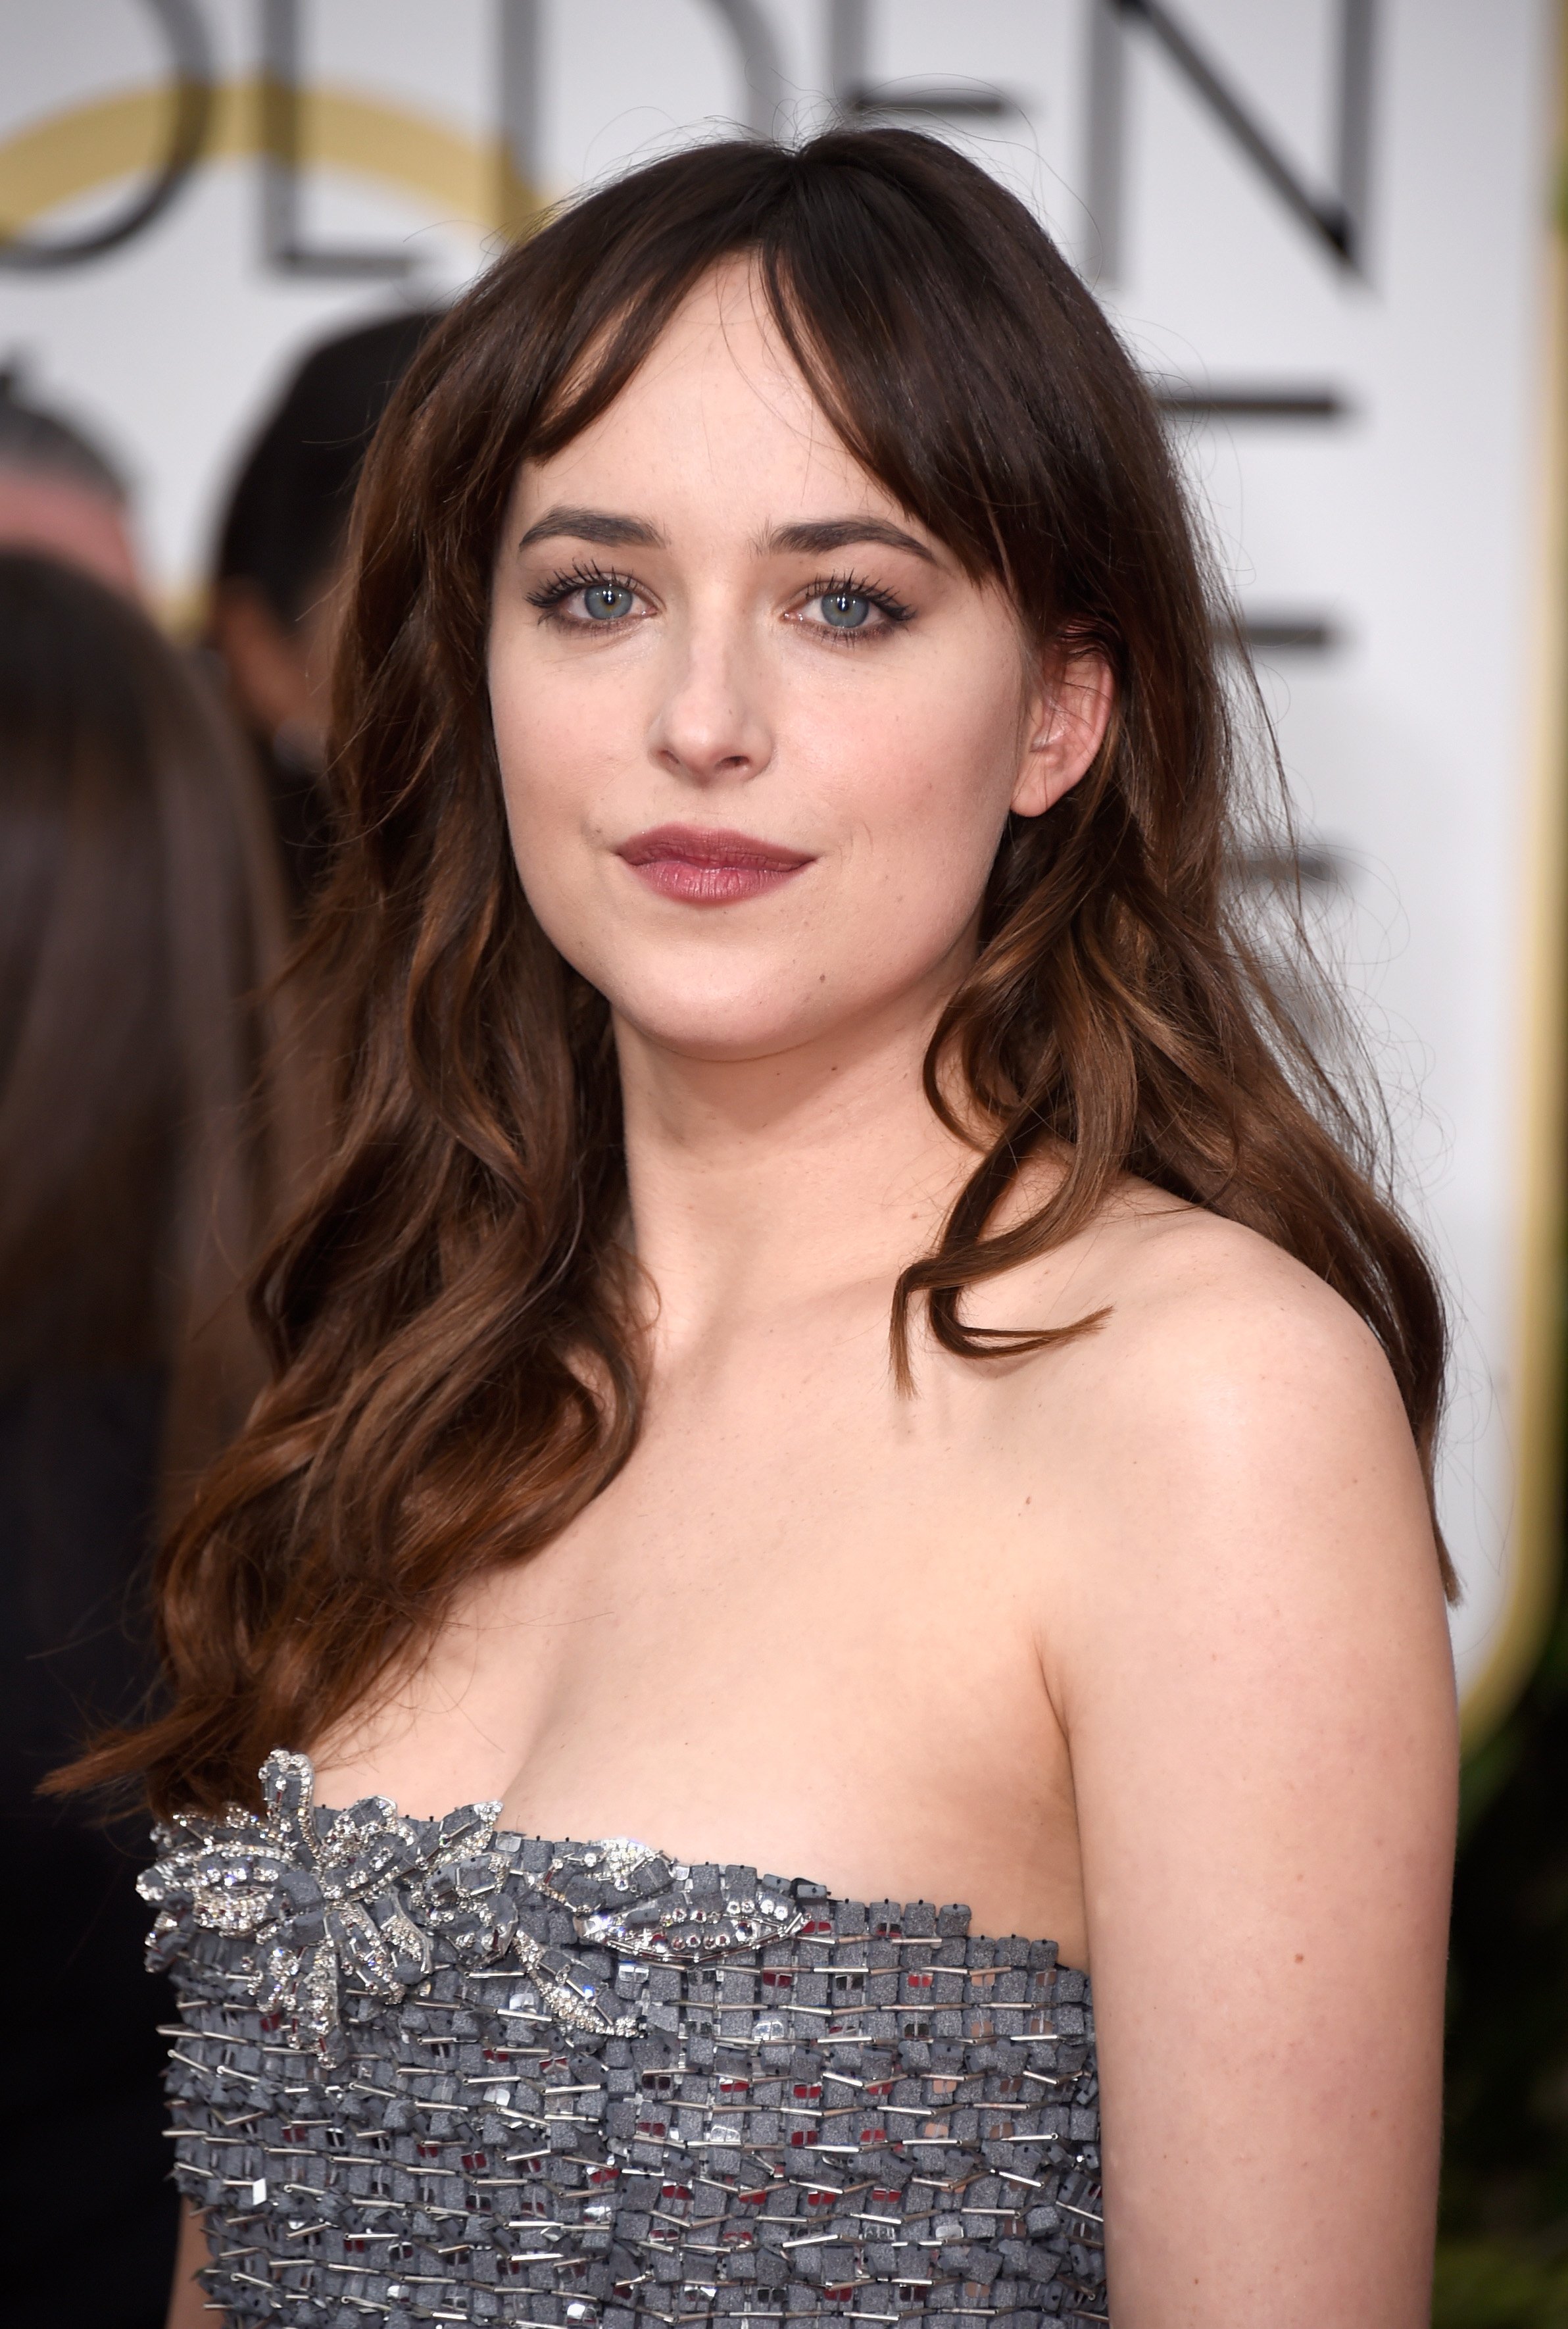 Actress Dakota Johnson attends the 72nd Annual Golden Globe Awards at The Beverly Hilton Hotel on Jan. 11, 2015 in Beverly Hills, California.